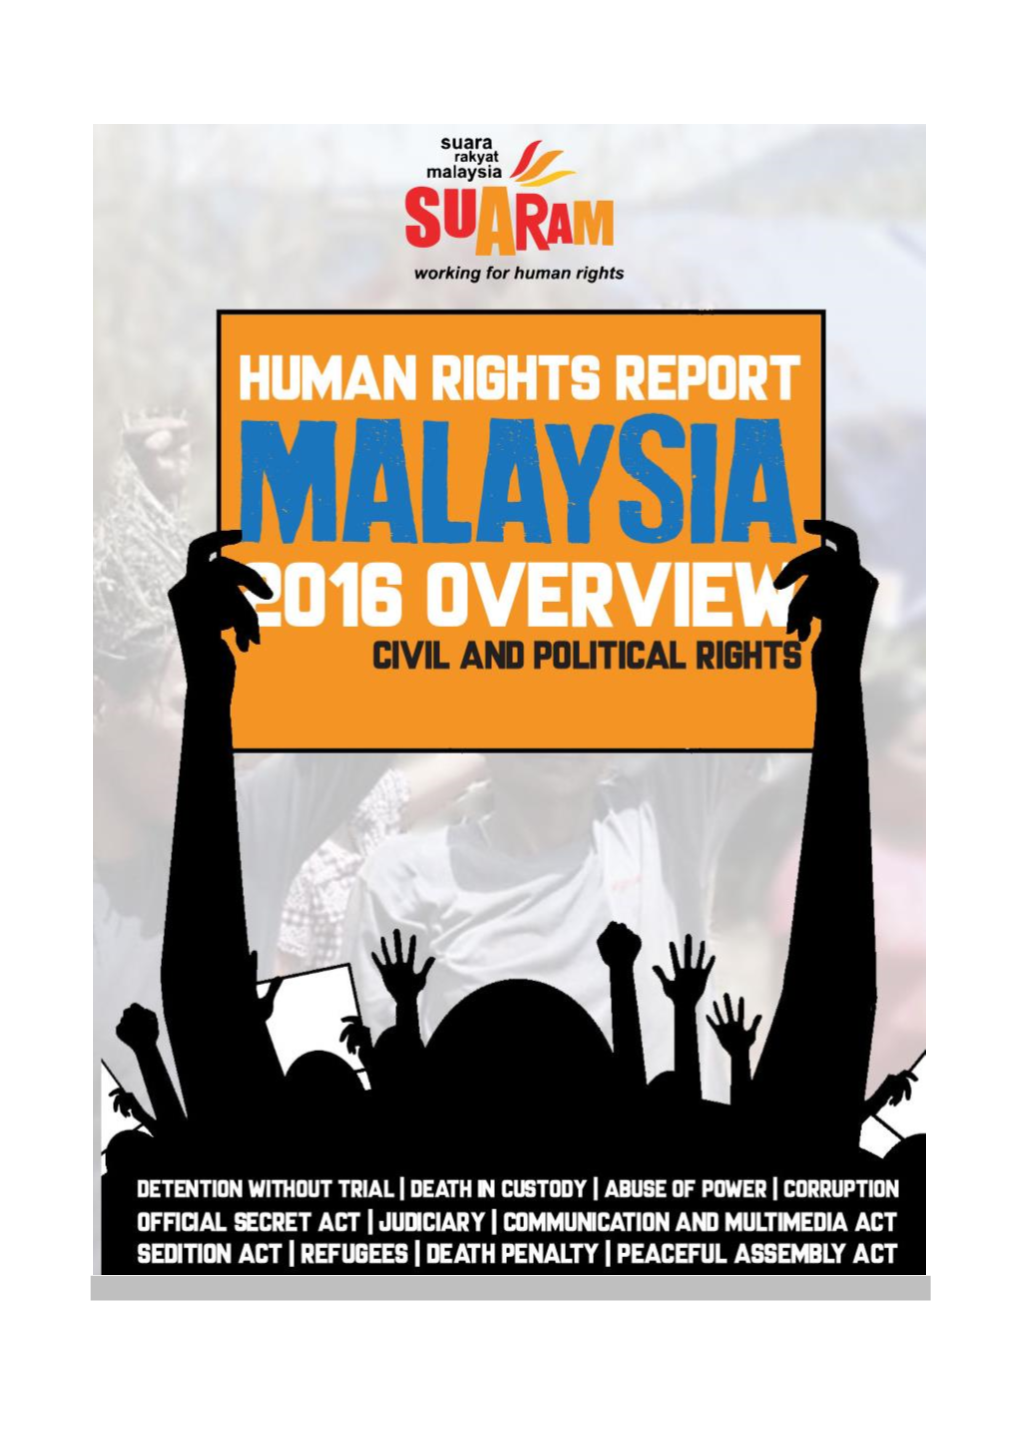 SUARAM Human Rights Report Overview 2016